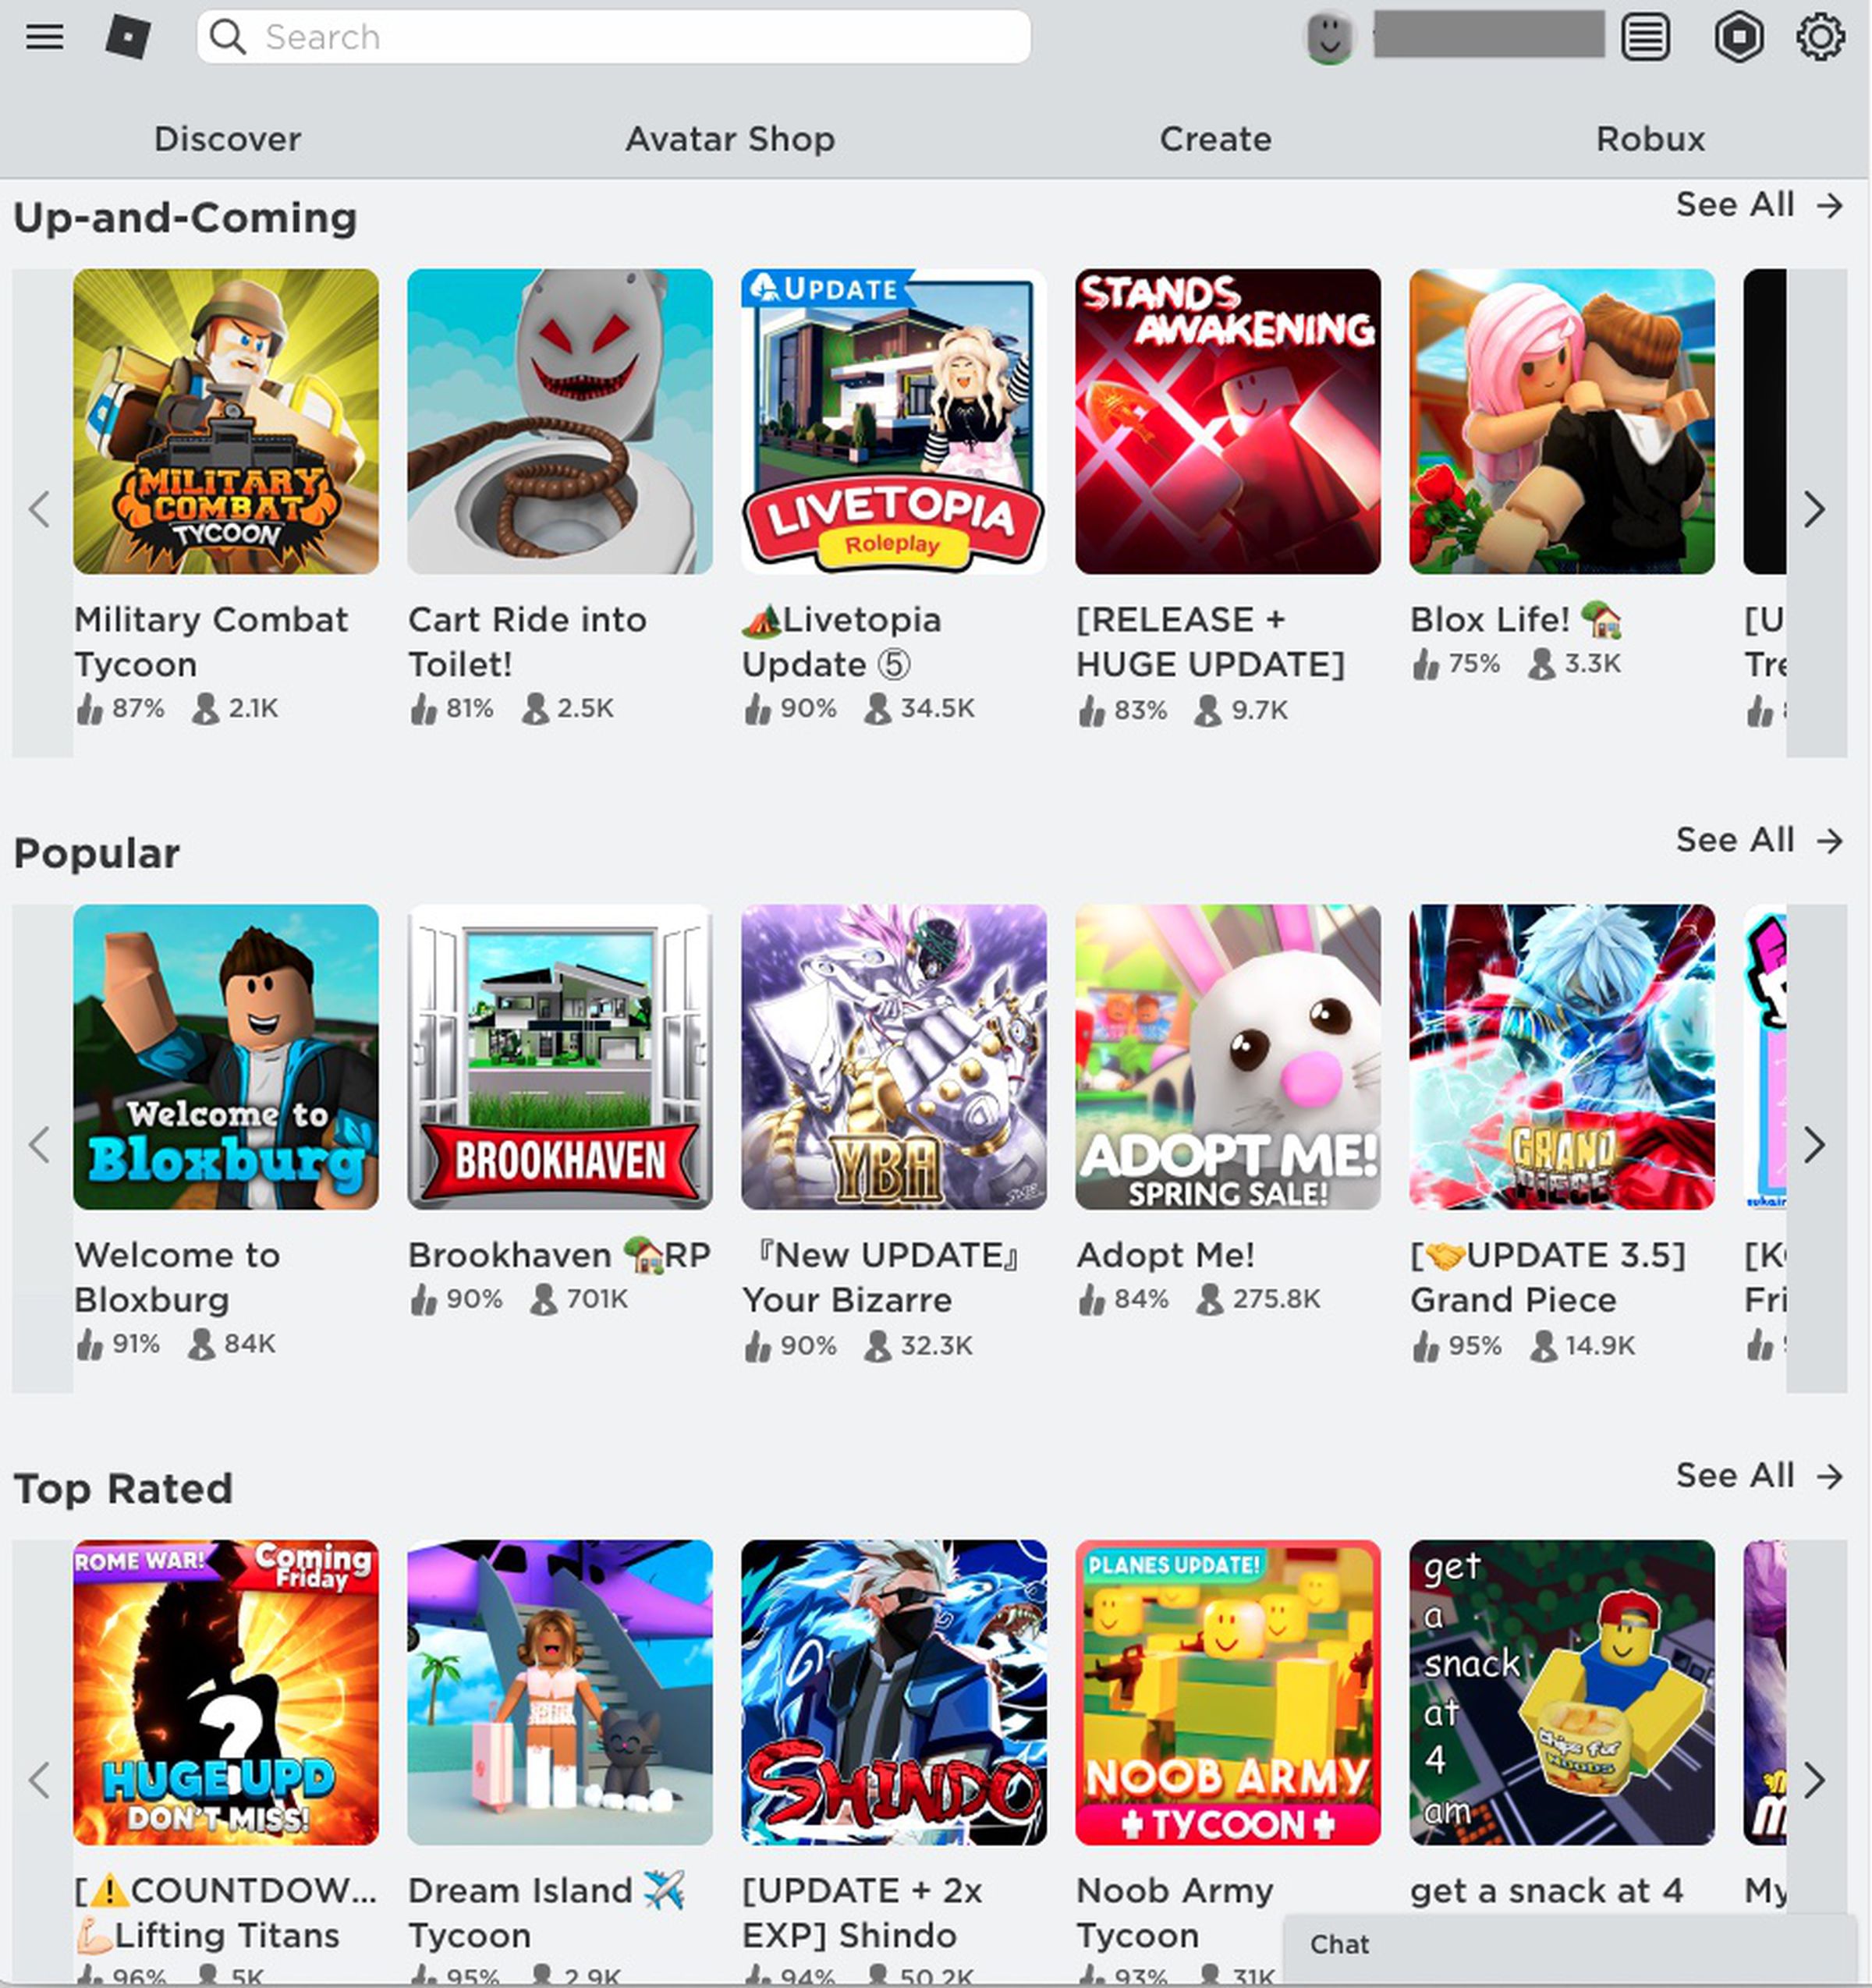 Roblox’s Discover tab.